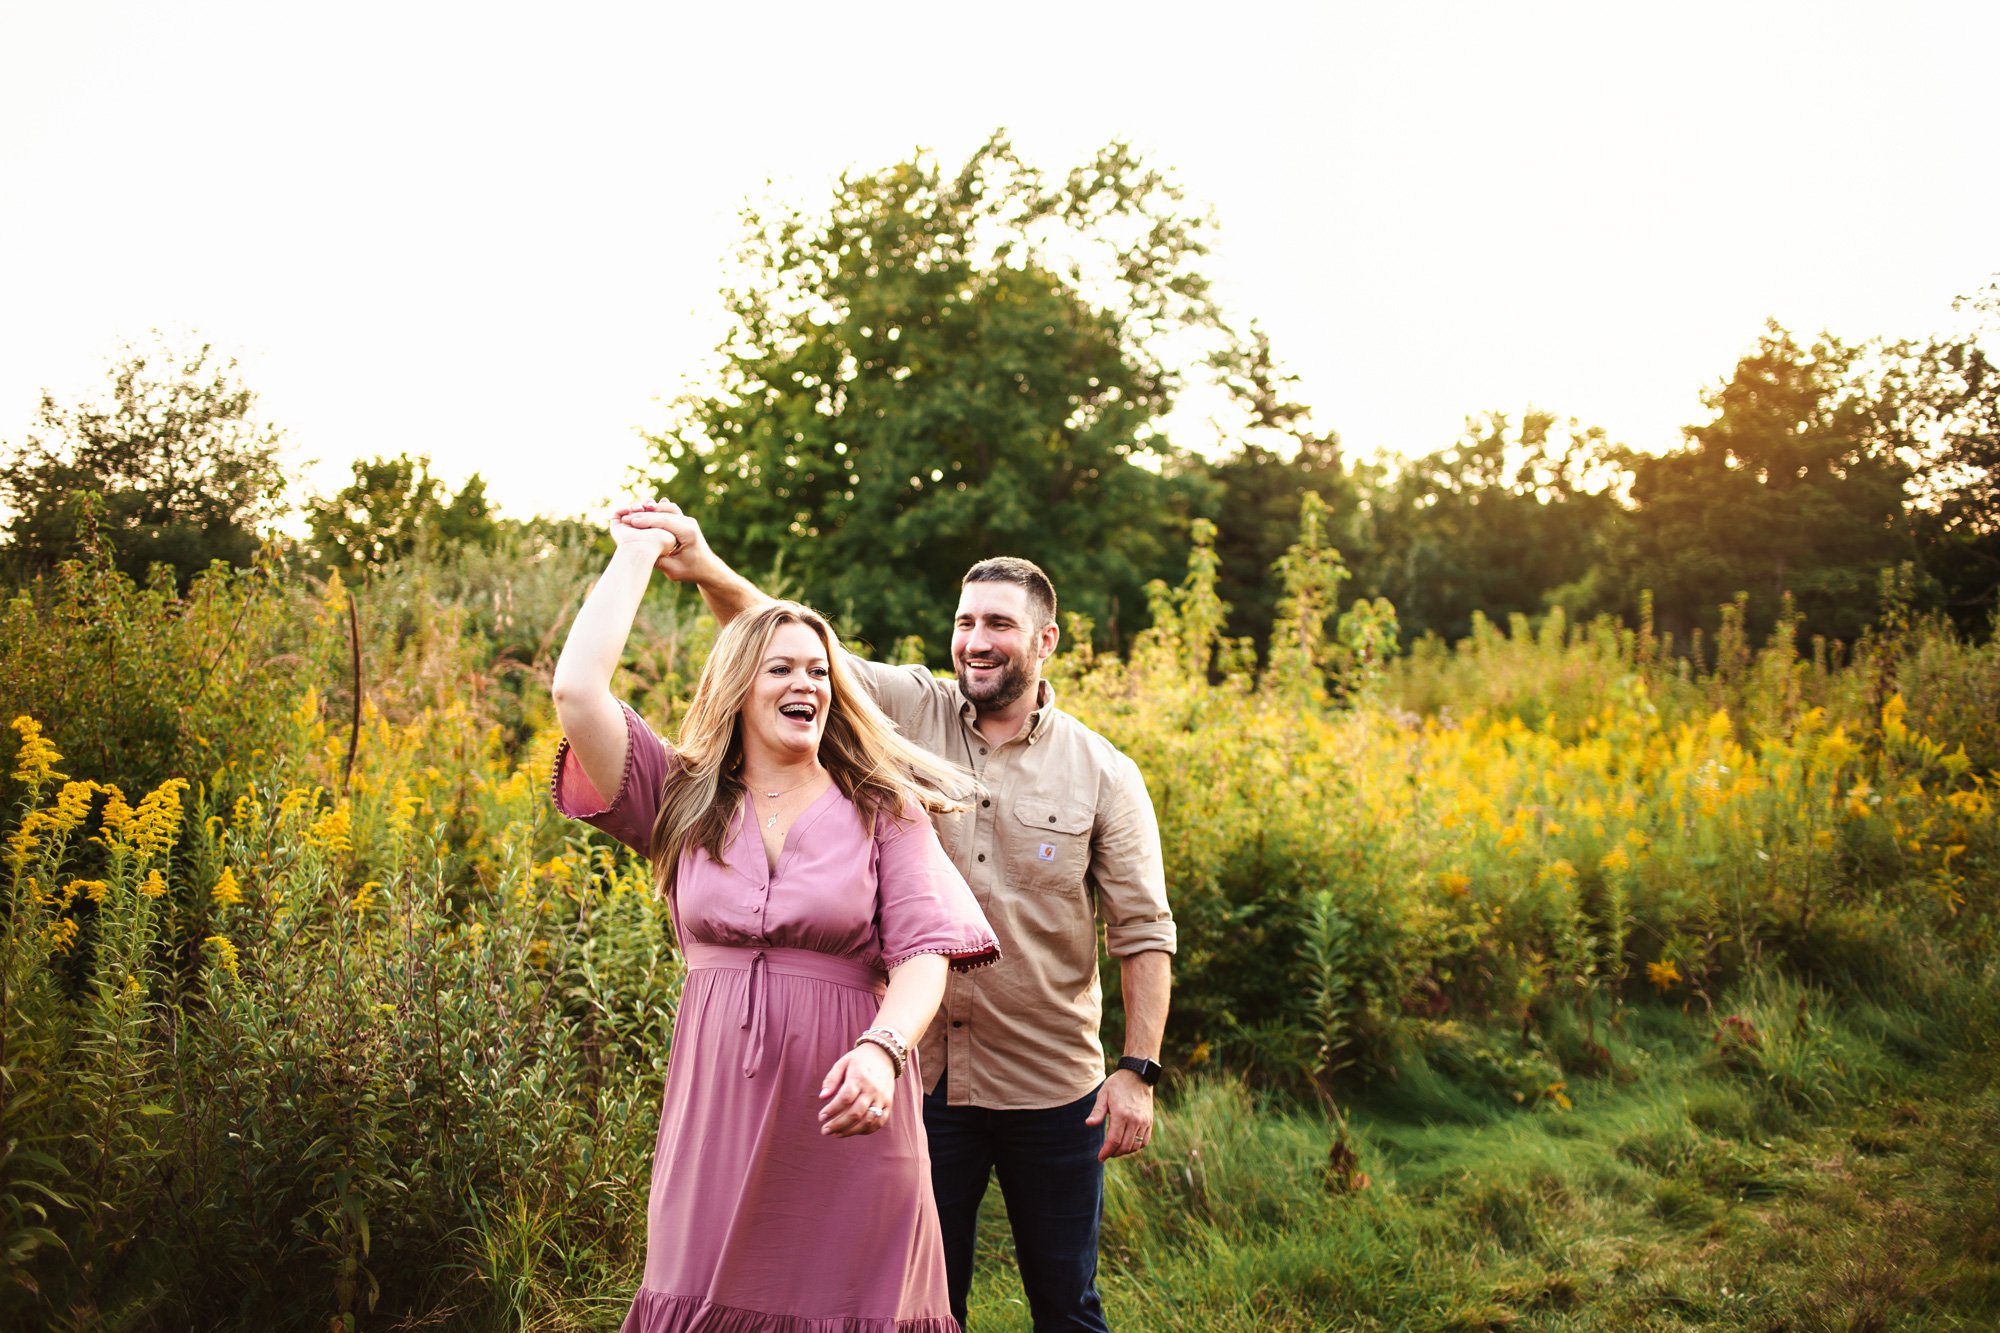  Teala Ward Photography captures a husband and wife dancing together in an Illinois field. family photography IL #TealaWardPhotography #TealaWardFamilies #minisessionvsfullsessions #photography #Illinoisphotography #familyminisession 